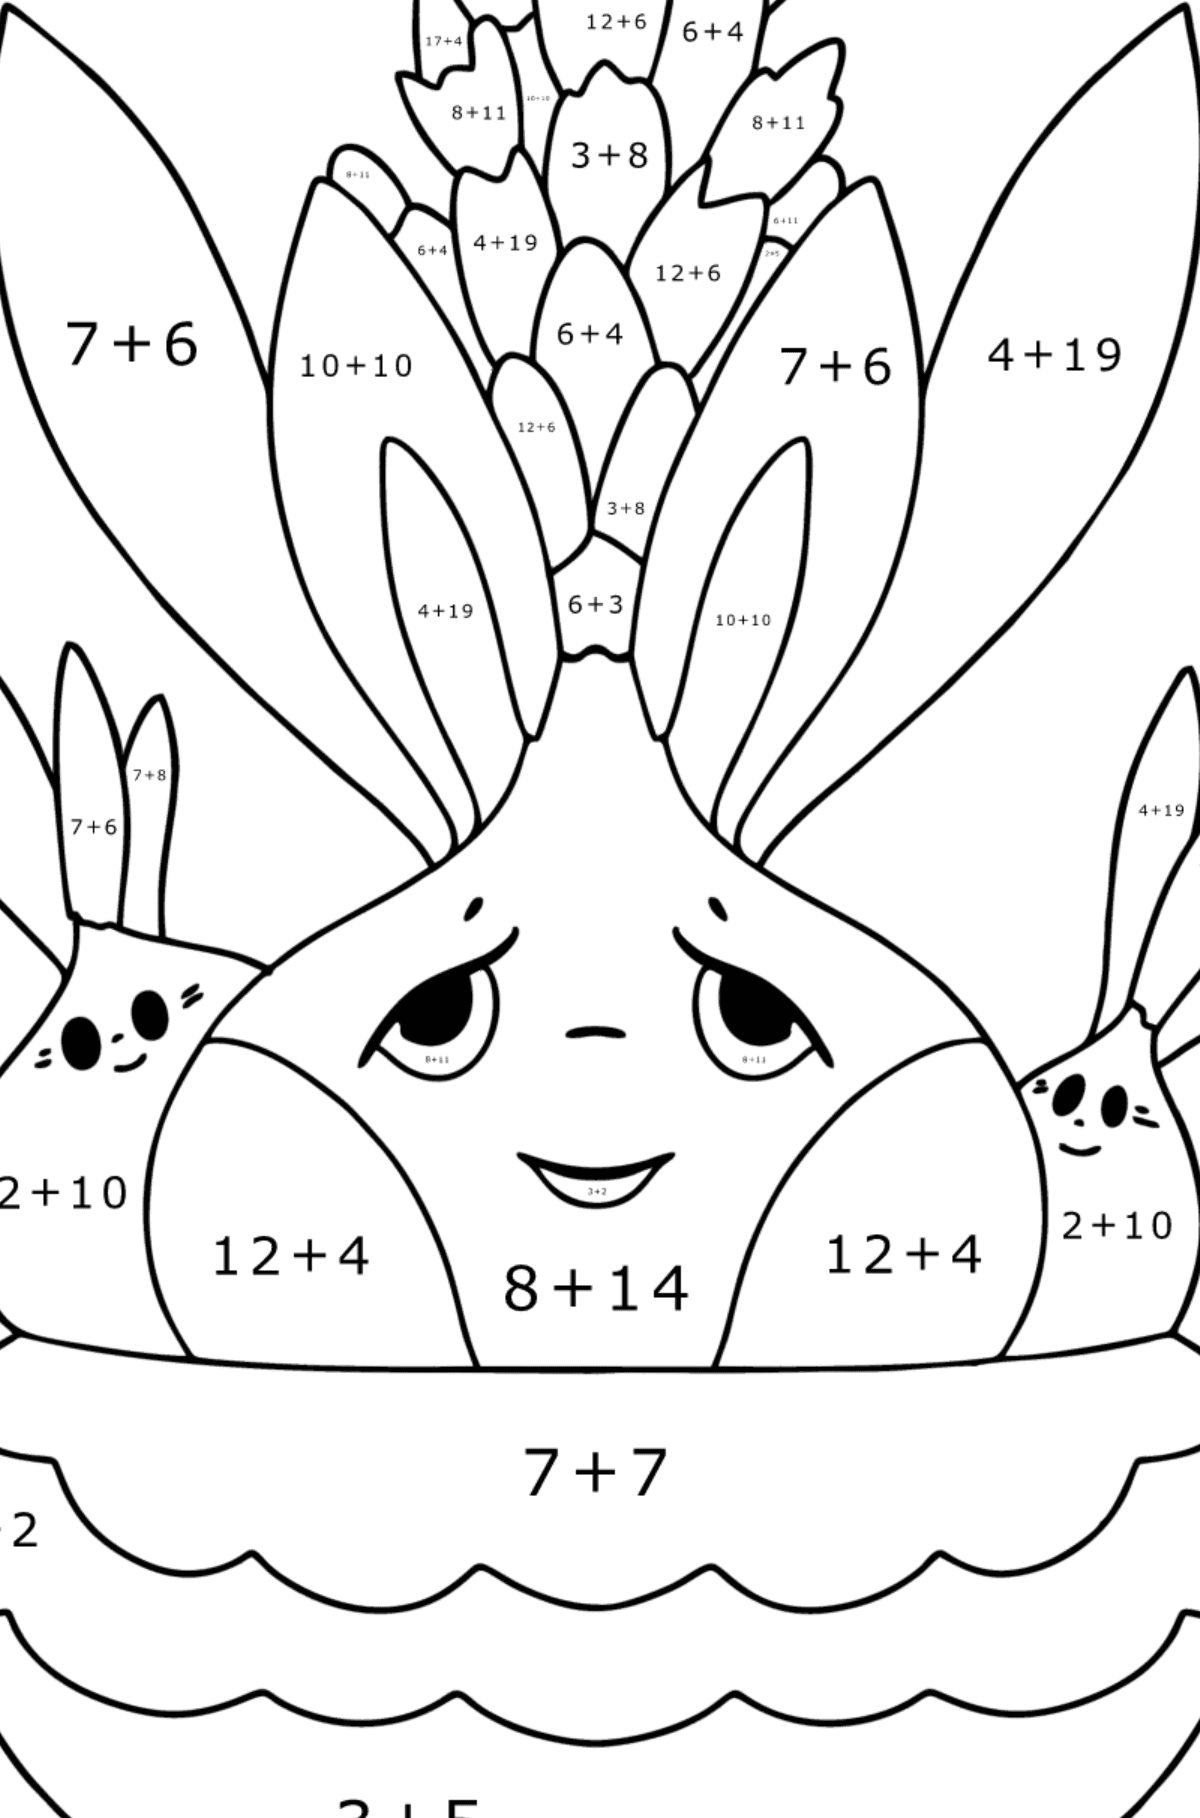 Hyacinth flowers with eyes coloring page - Math Coloring - Addition for Kids